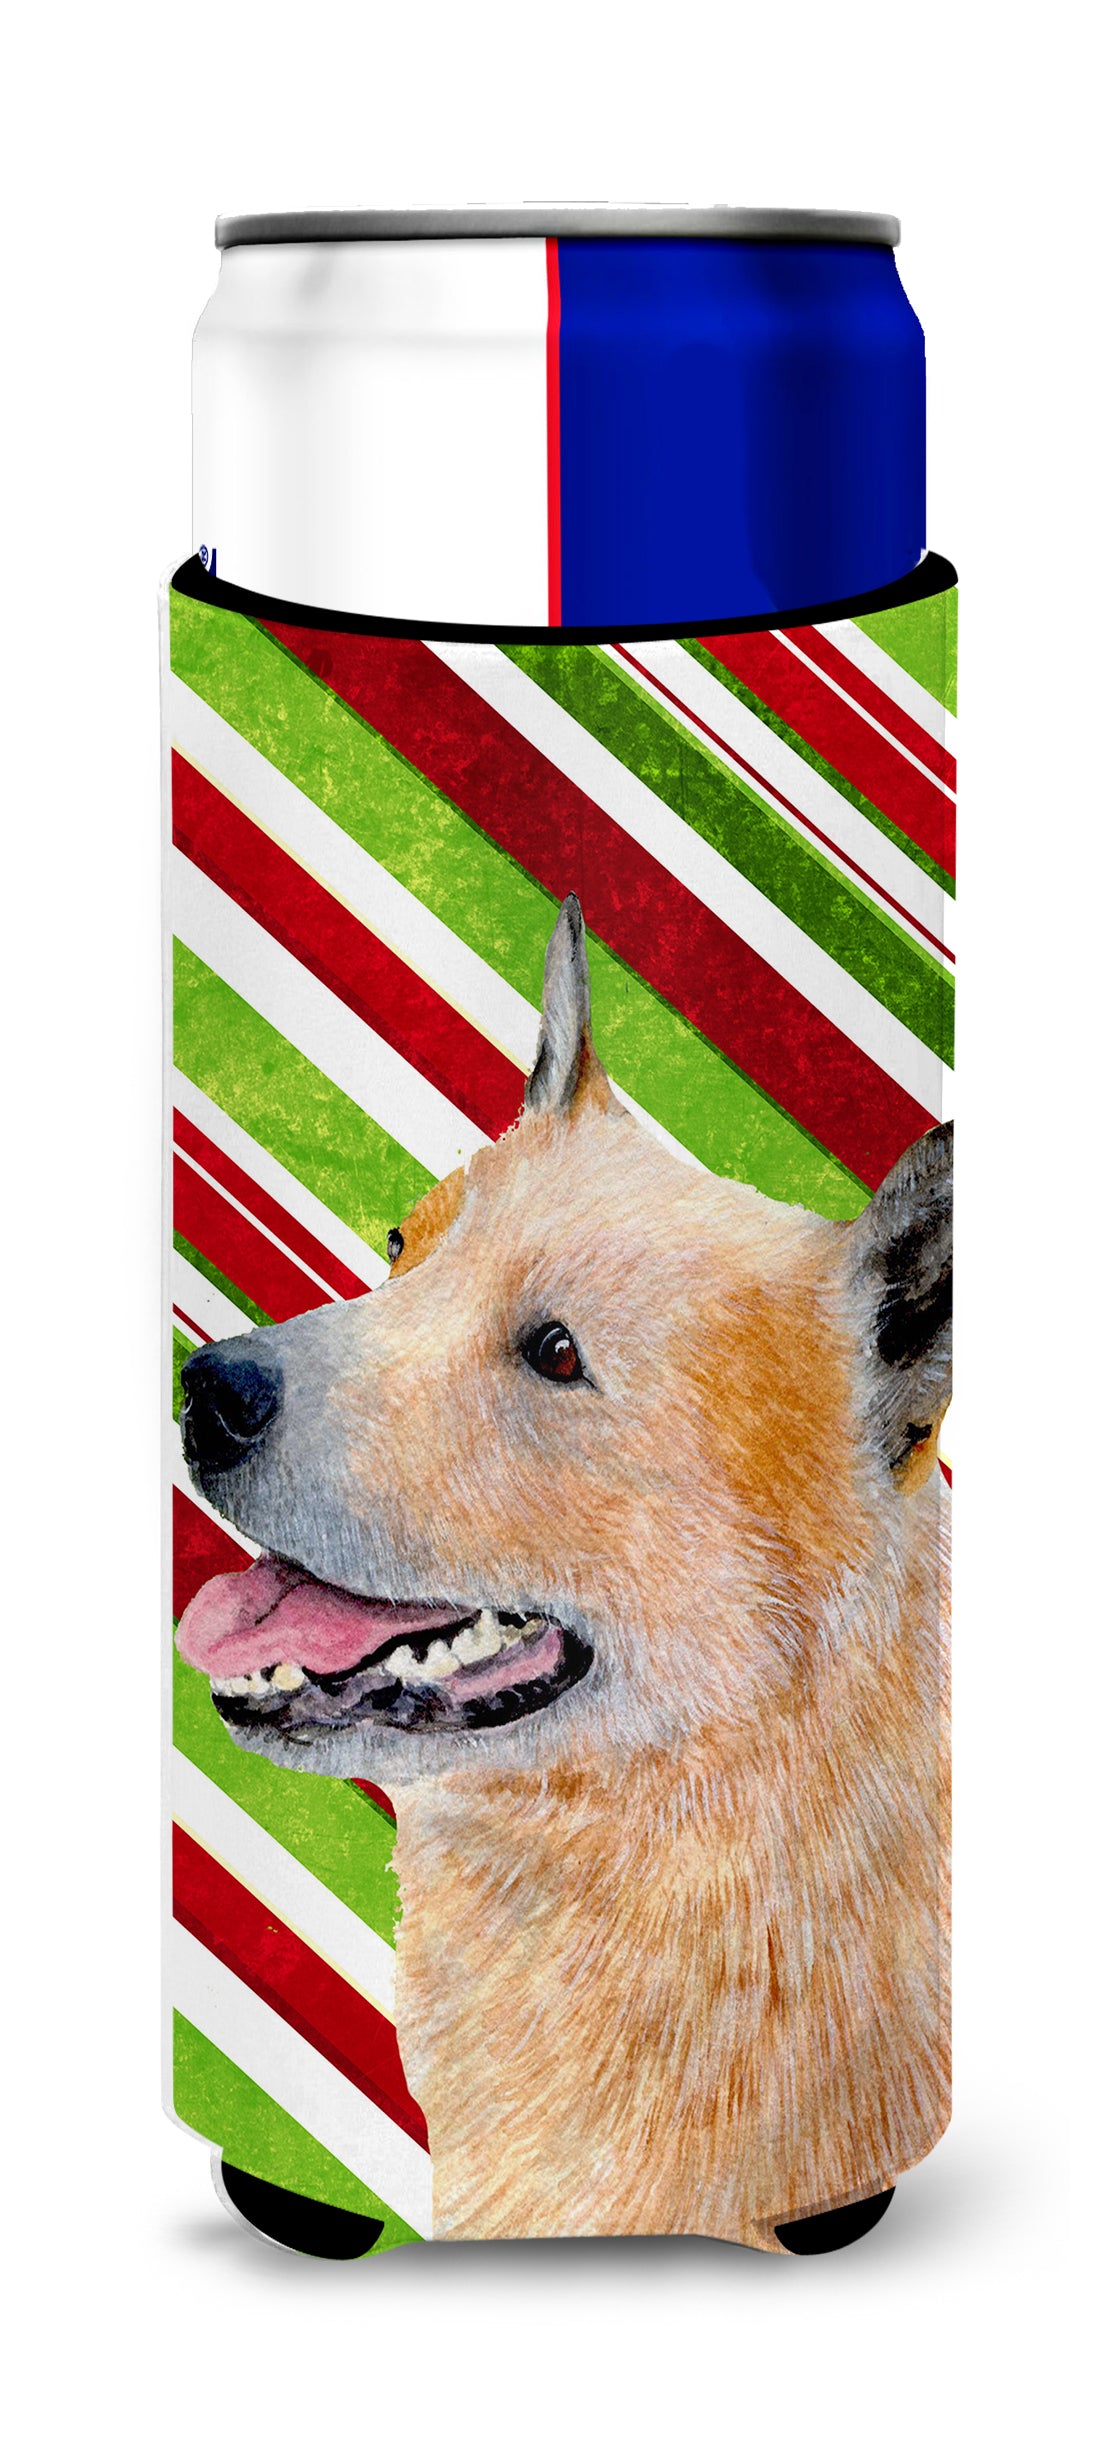 Australian Cattle Dog Candy Cane Holiday Christmas Ultra Beverage Insulators for slim cans LH9227MUK